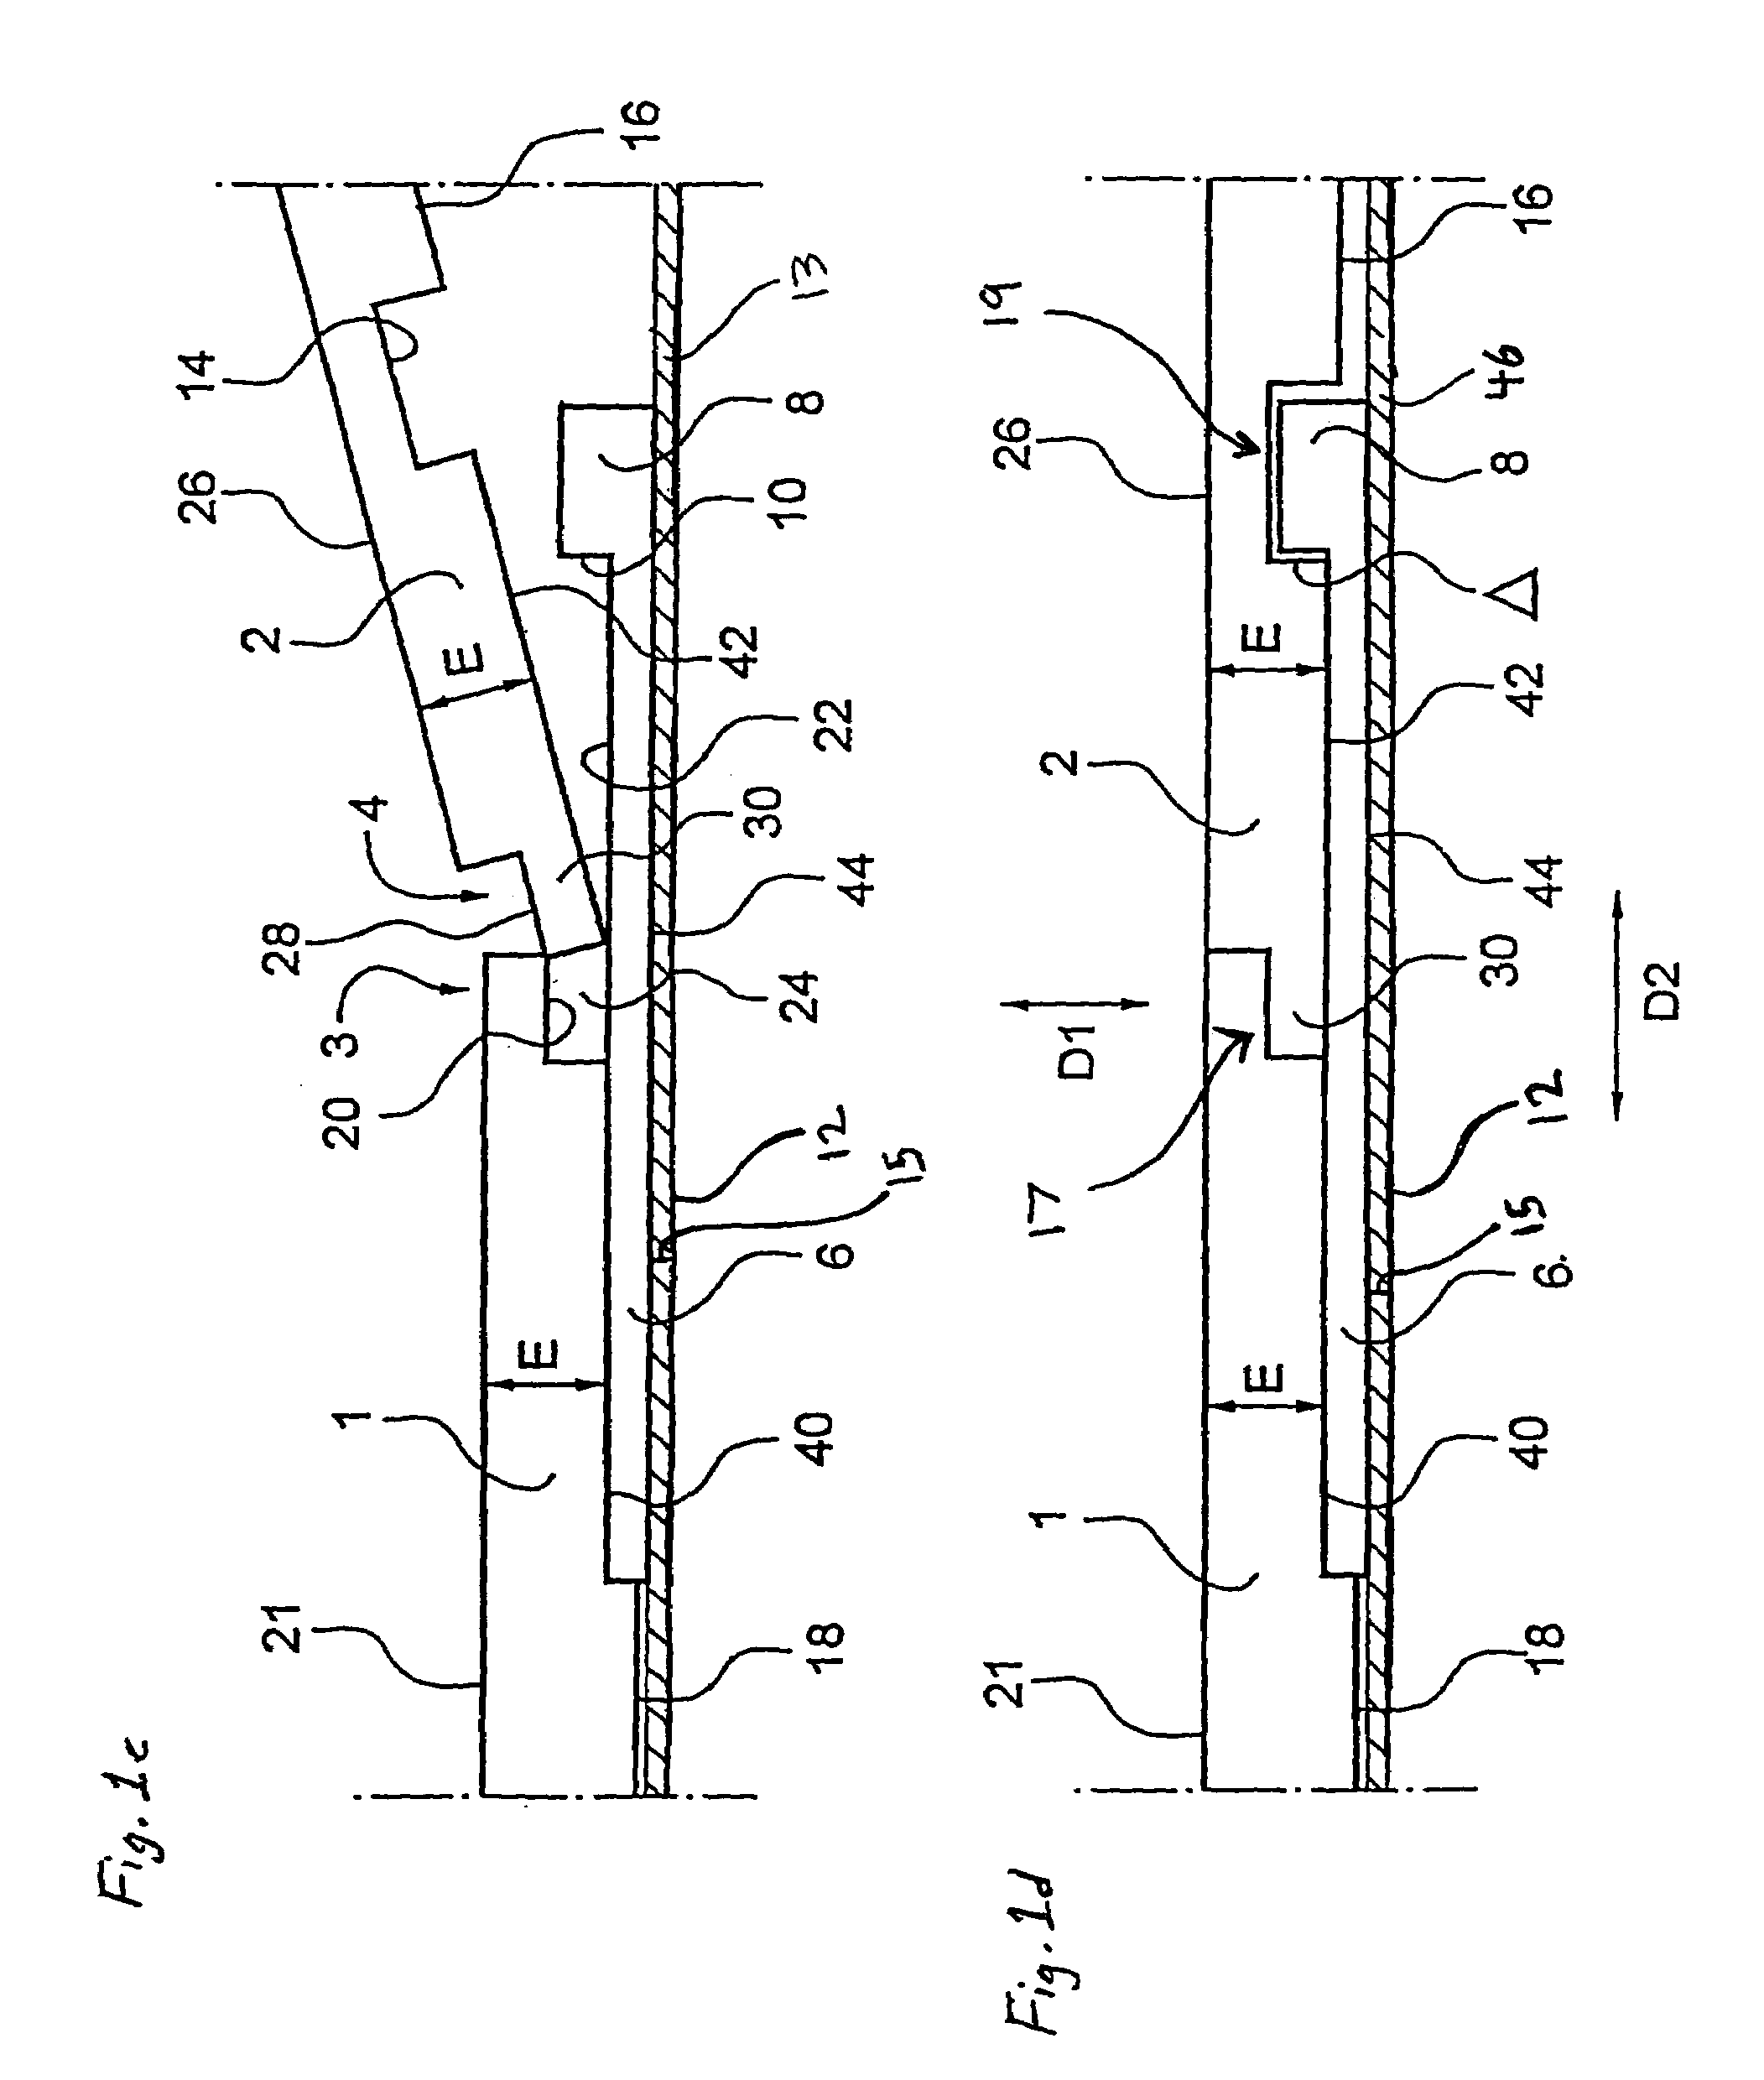 System for joining building panels